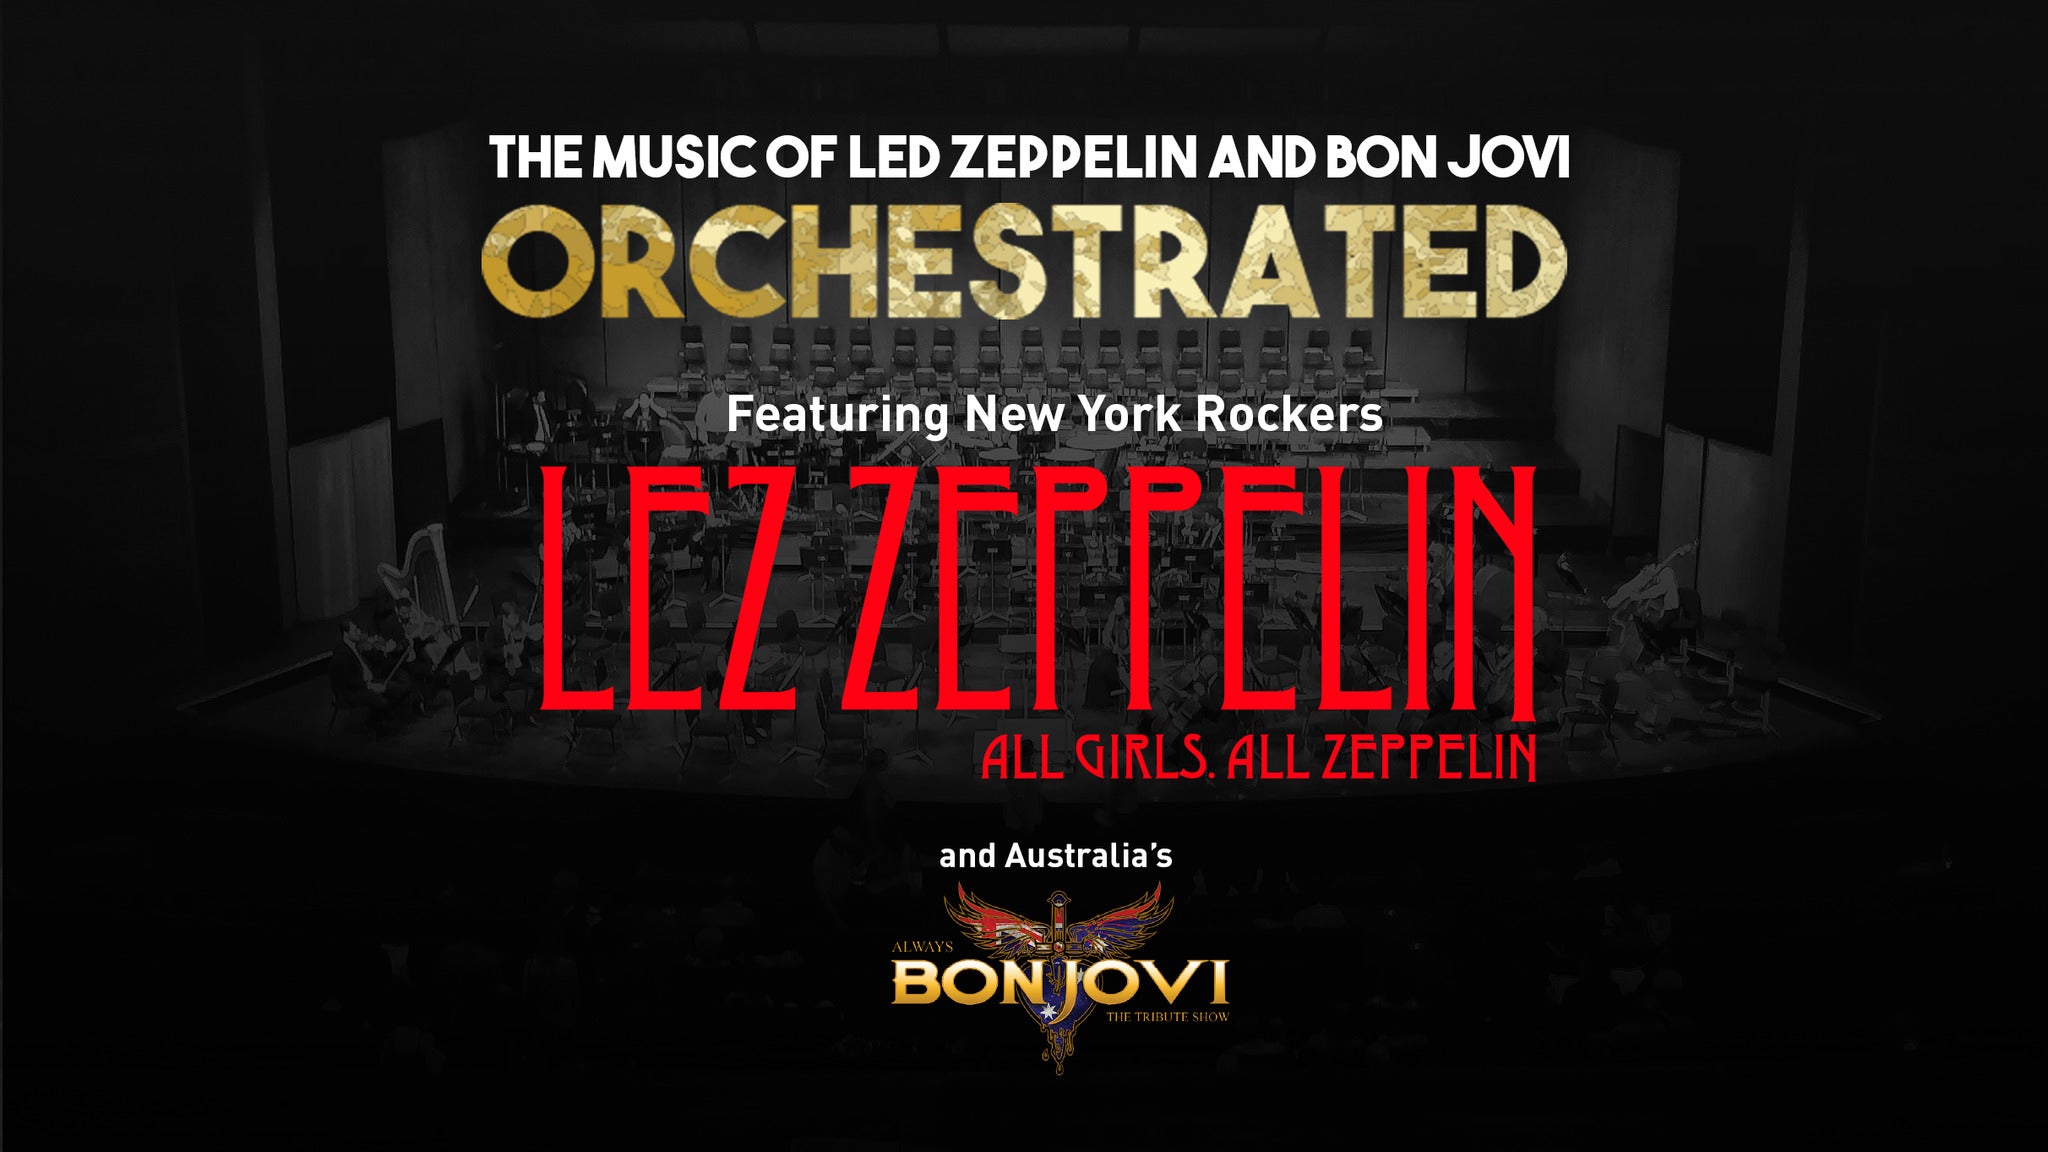 Image used with permission from Ticketmaster | Lez Zeppelin and Always Bon Jovi Orchestrated tickets